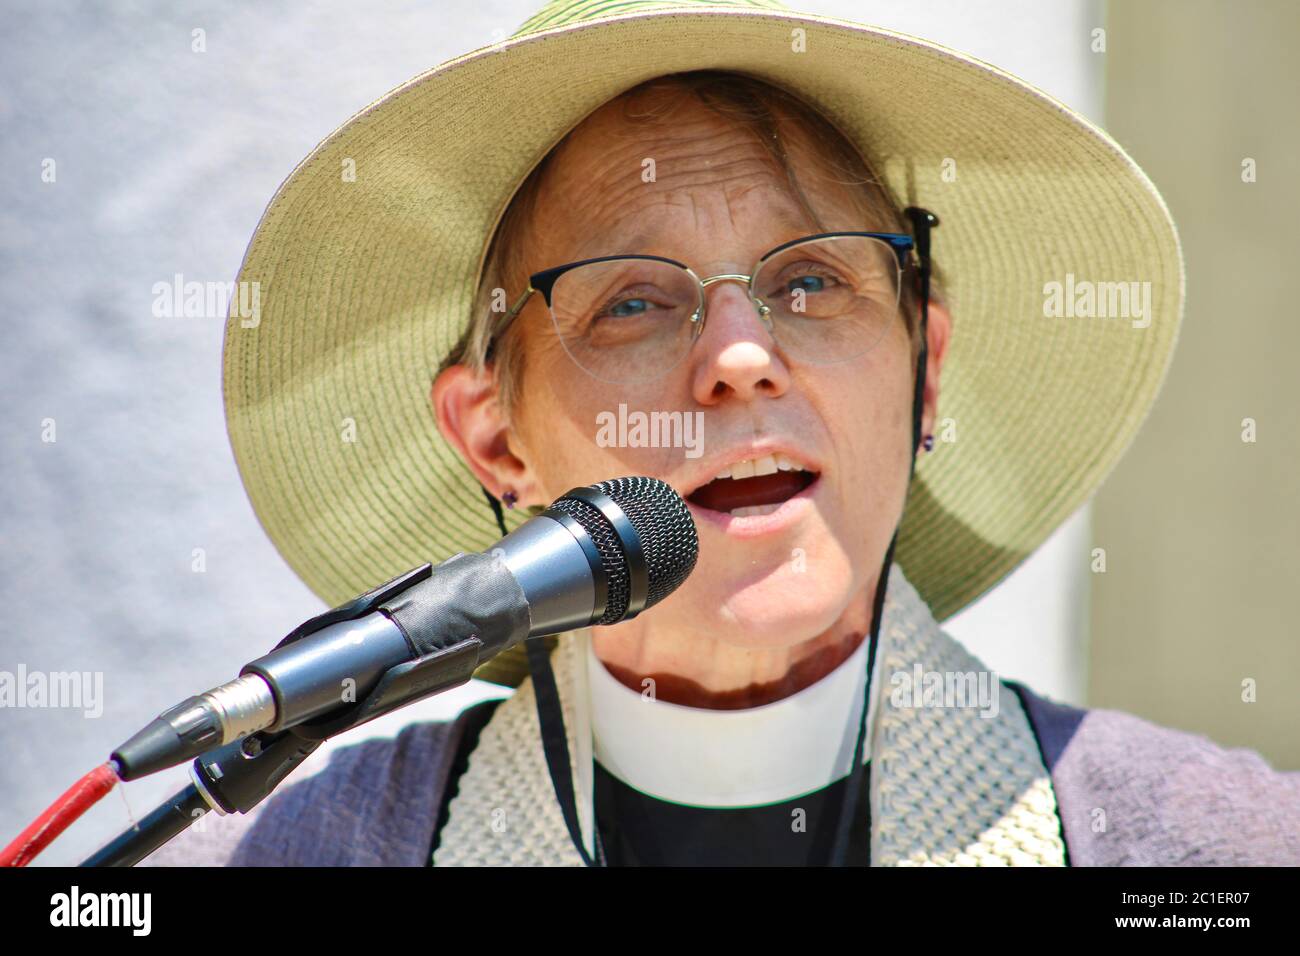 June 14, 2020, Washington D.C, District of Columbia, U.S: Interfaith Leaders Join Episcopalian Bishop Mariann Edgar Budde at St John's Church, Lafayette Square, on June 14th at 2:00pm EST in 'Call for Love in Action: Prayers for Justice'' on President Trump's Birthday, in condemnation of racism and Trump's ungodly and un-American use of force and tear gas against peaceful protestors to clear the square so he could pose for a photo op at the church two weeks ago. This event is Co-Sponsored by the Episcopal Diocese of Washington (EDOW) an inter-faith, ecumenical prayer vigil for concre Stock Photo